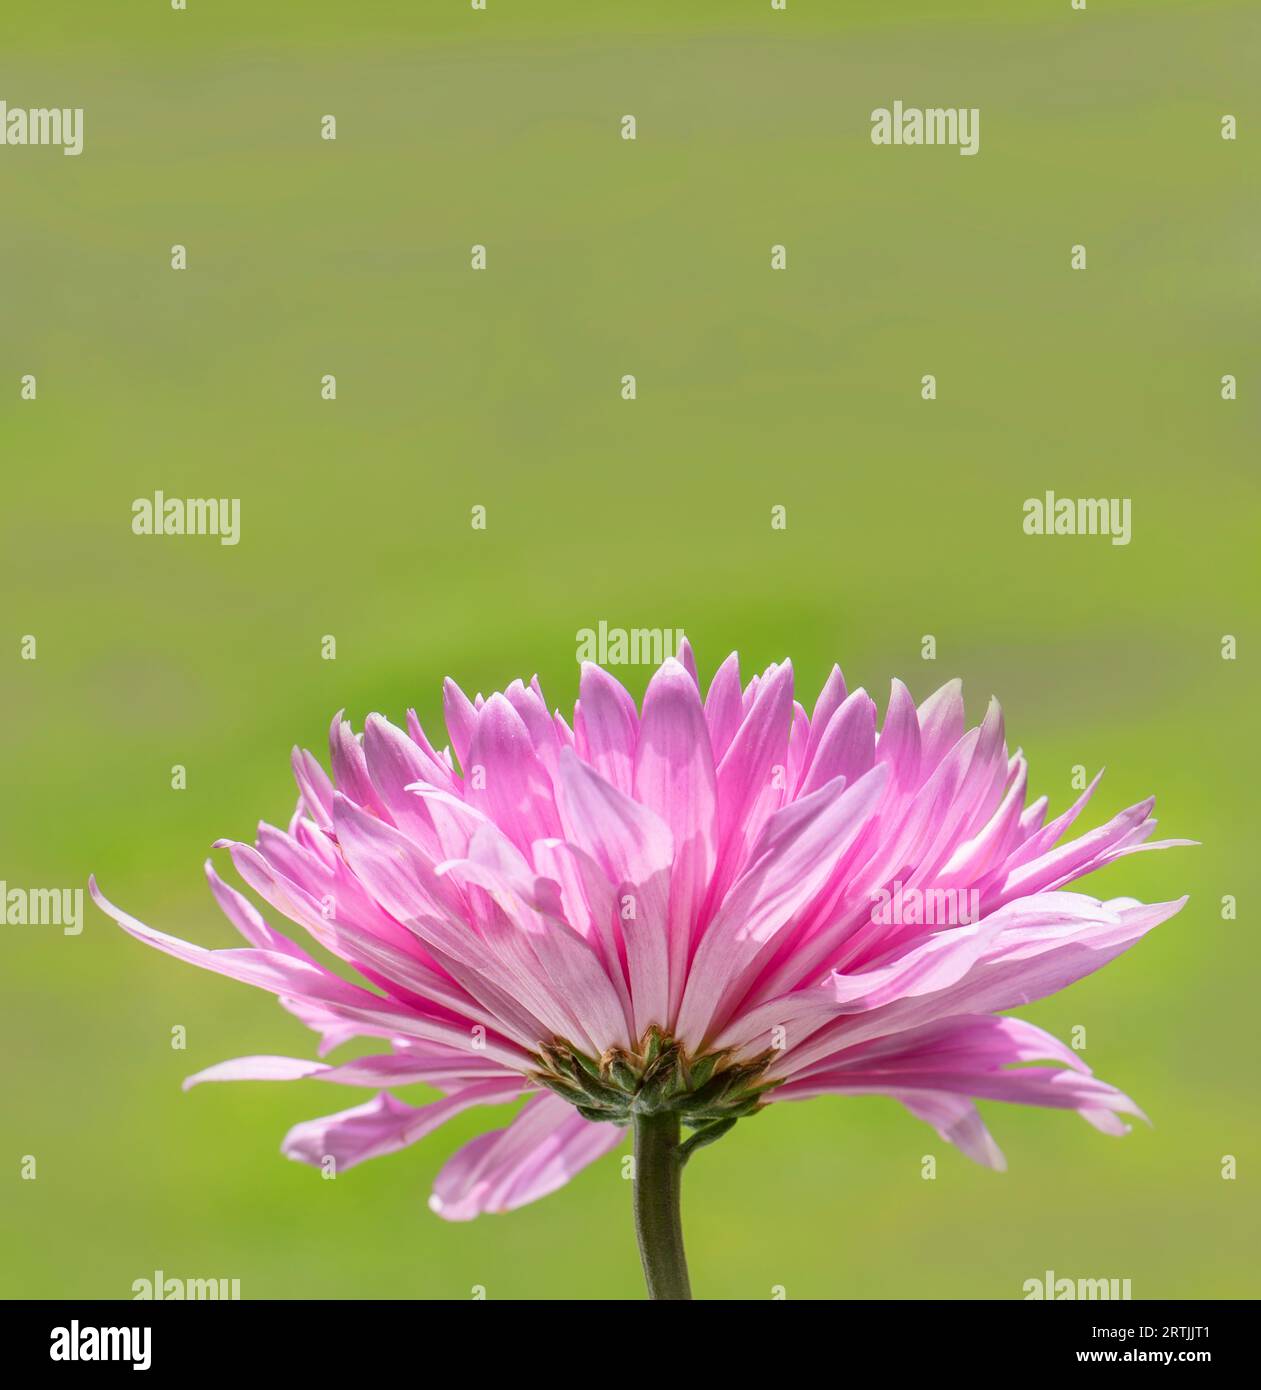 Blooming single pink chrysanthemum flower with a soft green background, room for text Stock Photo